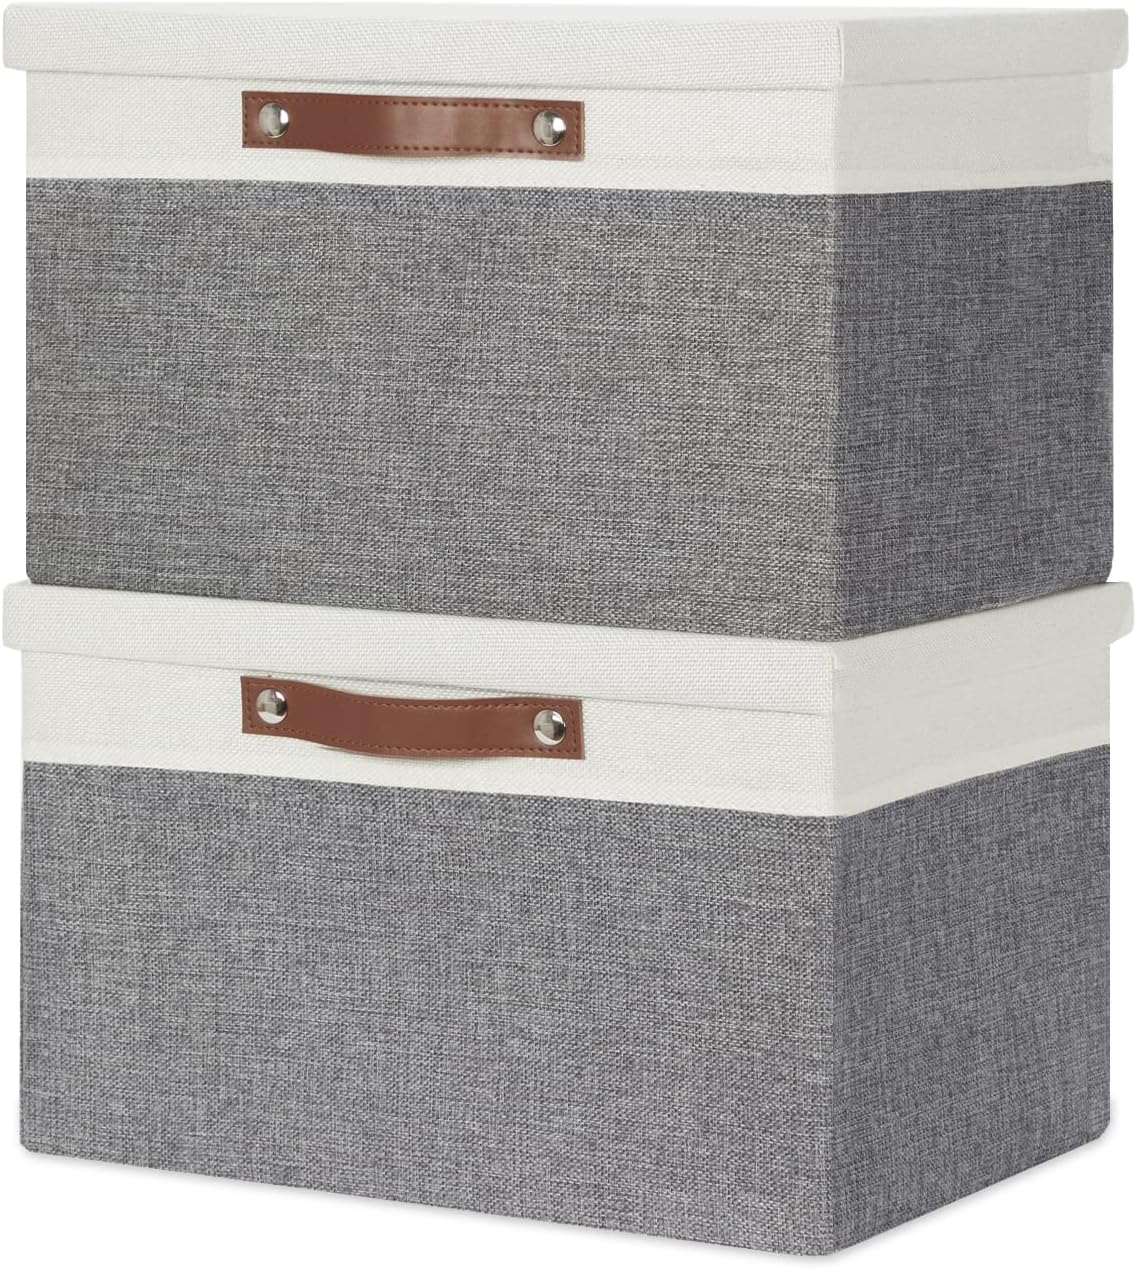 Temary Collapsible Storage Bins Storage Boxes with lid, 2 Pack Storage Baskets with Lid Decorative Storage Clothes, Toys, Organizer Bins with Handles (White&Gray, 15x11x9.5inch)